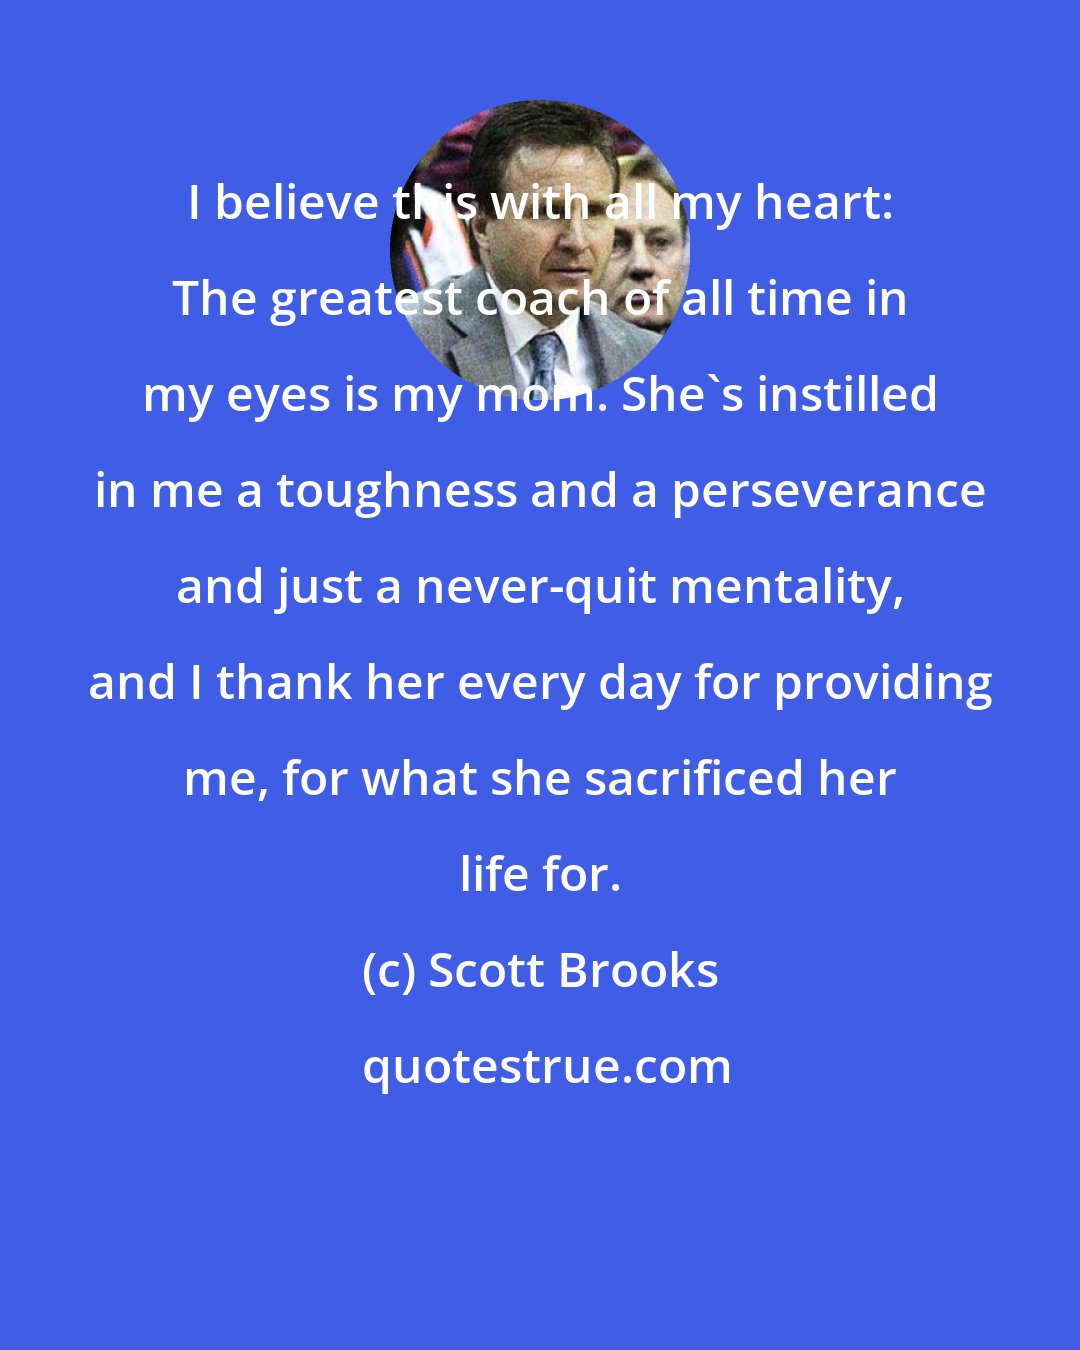 Scott Brooks: I believe this with all my heart: The greatest coach of all time in my eyes is my mom. She's instilled in me a toughness and a perseverance and just a never-quit mentality, and I thank her every day for providing me, for what she sacrificed her life for.